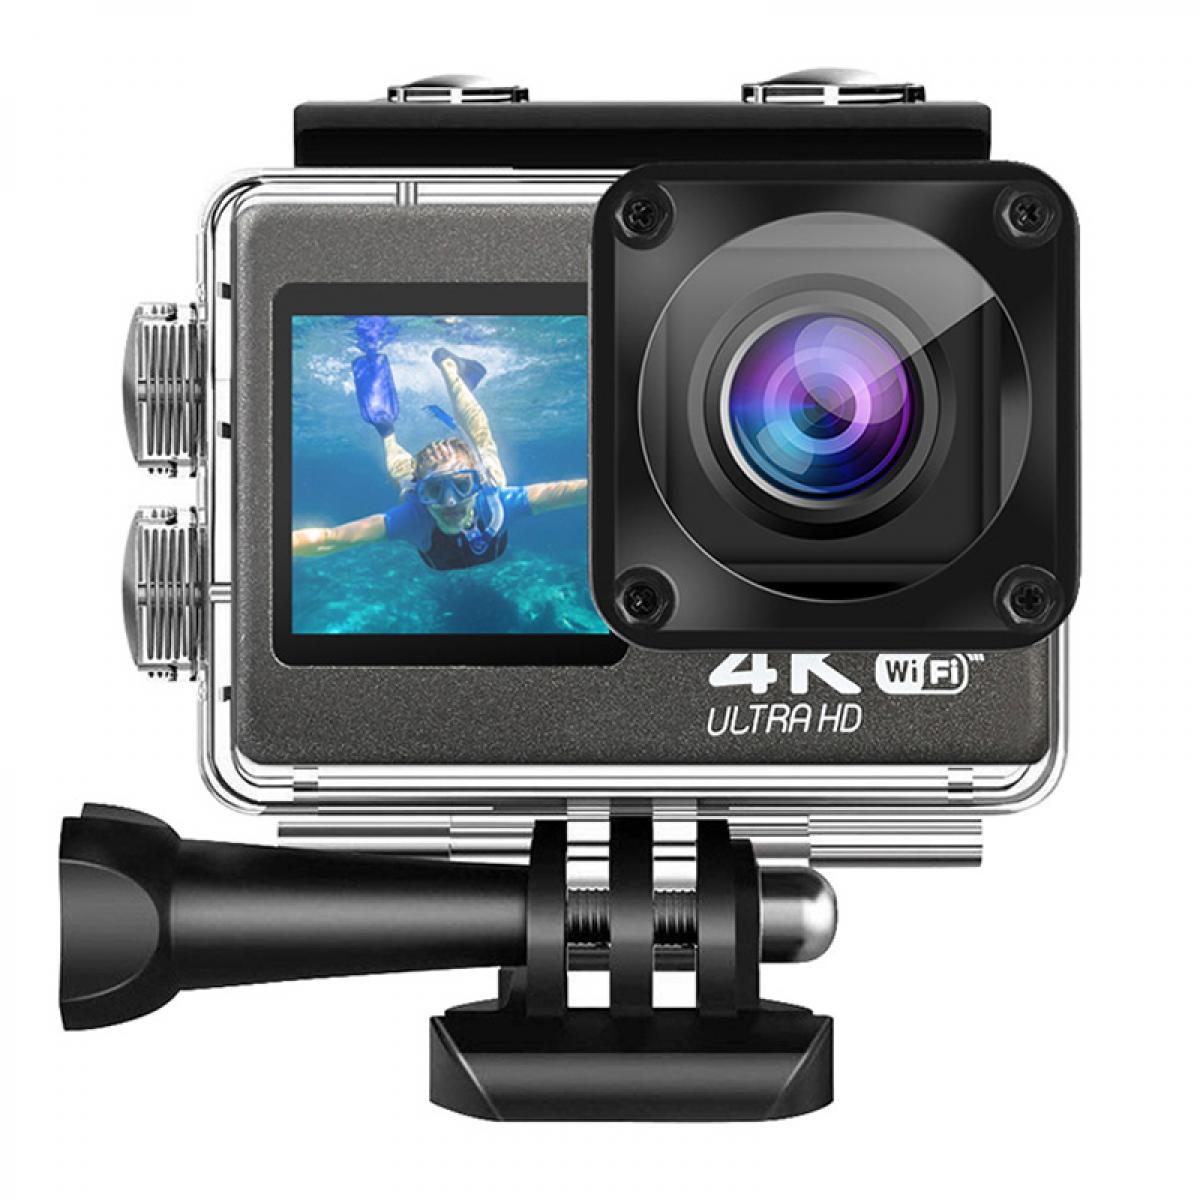 Akaso V50X, Video Cameras Reviews and Comments